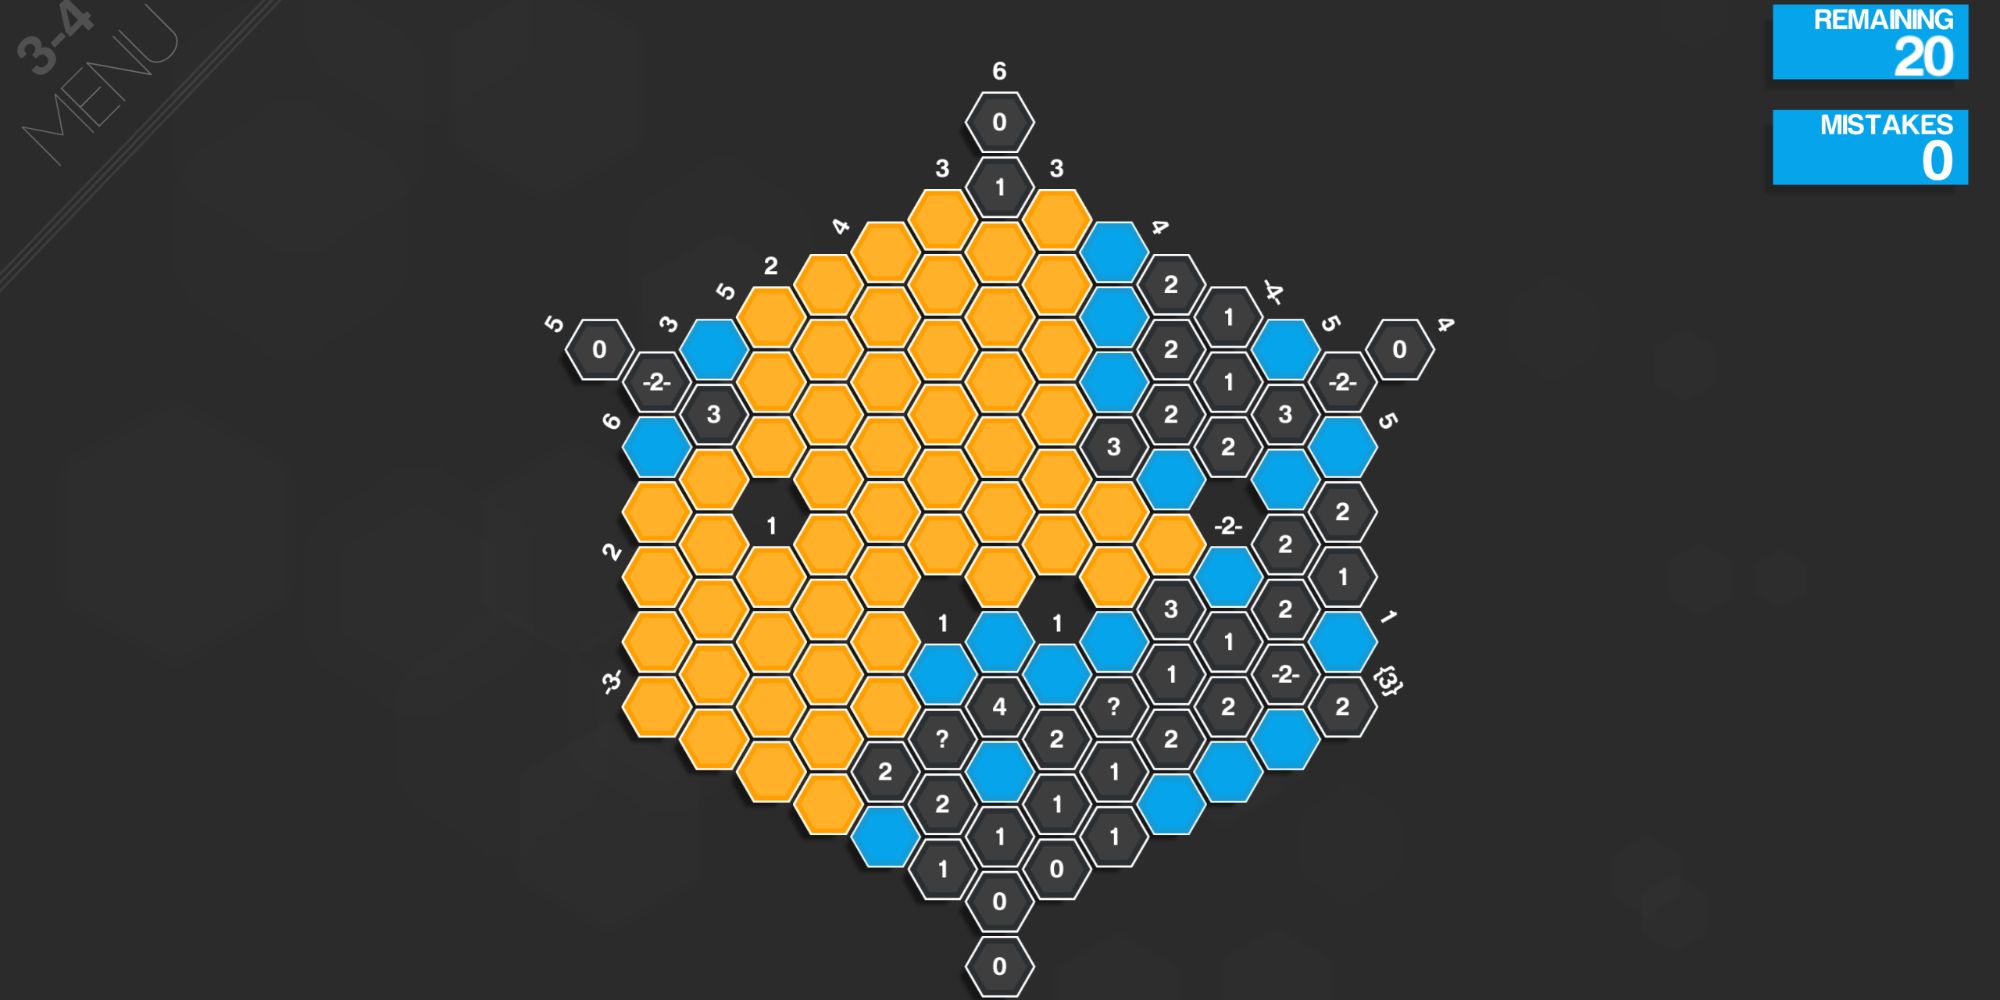 Hexcells Plus hexagonal pattern with blue and orange colors